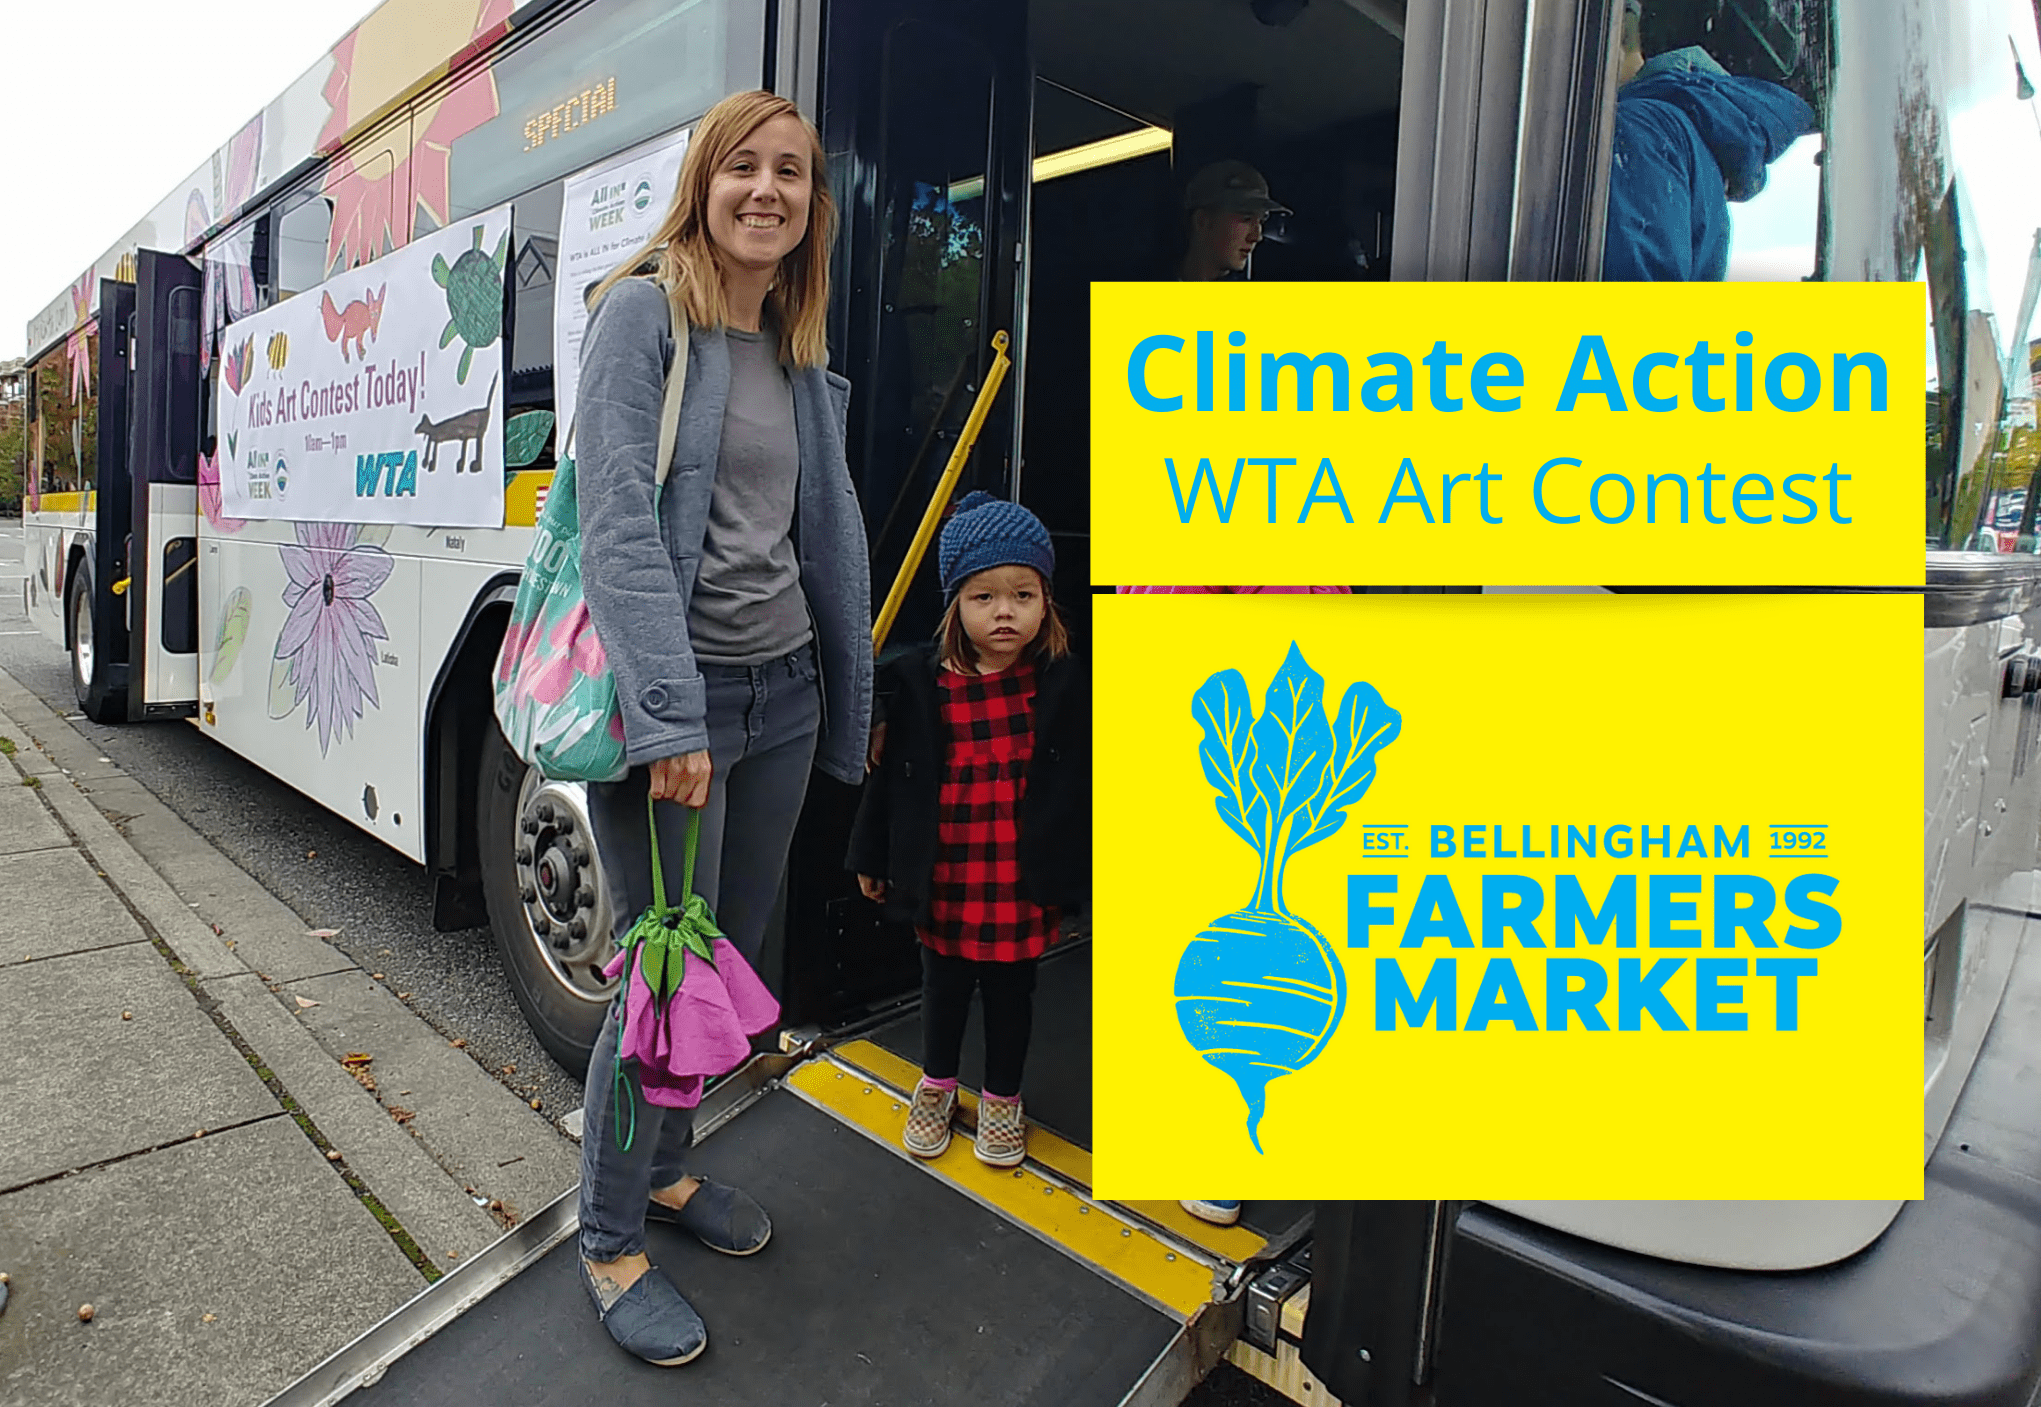 Adult and child standing in front of WTA bus with Bellingham Farmers Market logo and the words "Climate Action WTA Art Contest" in the foreground